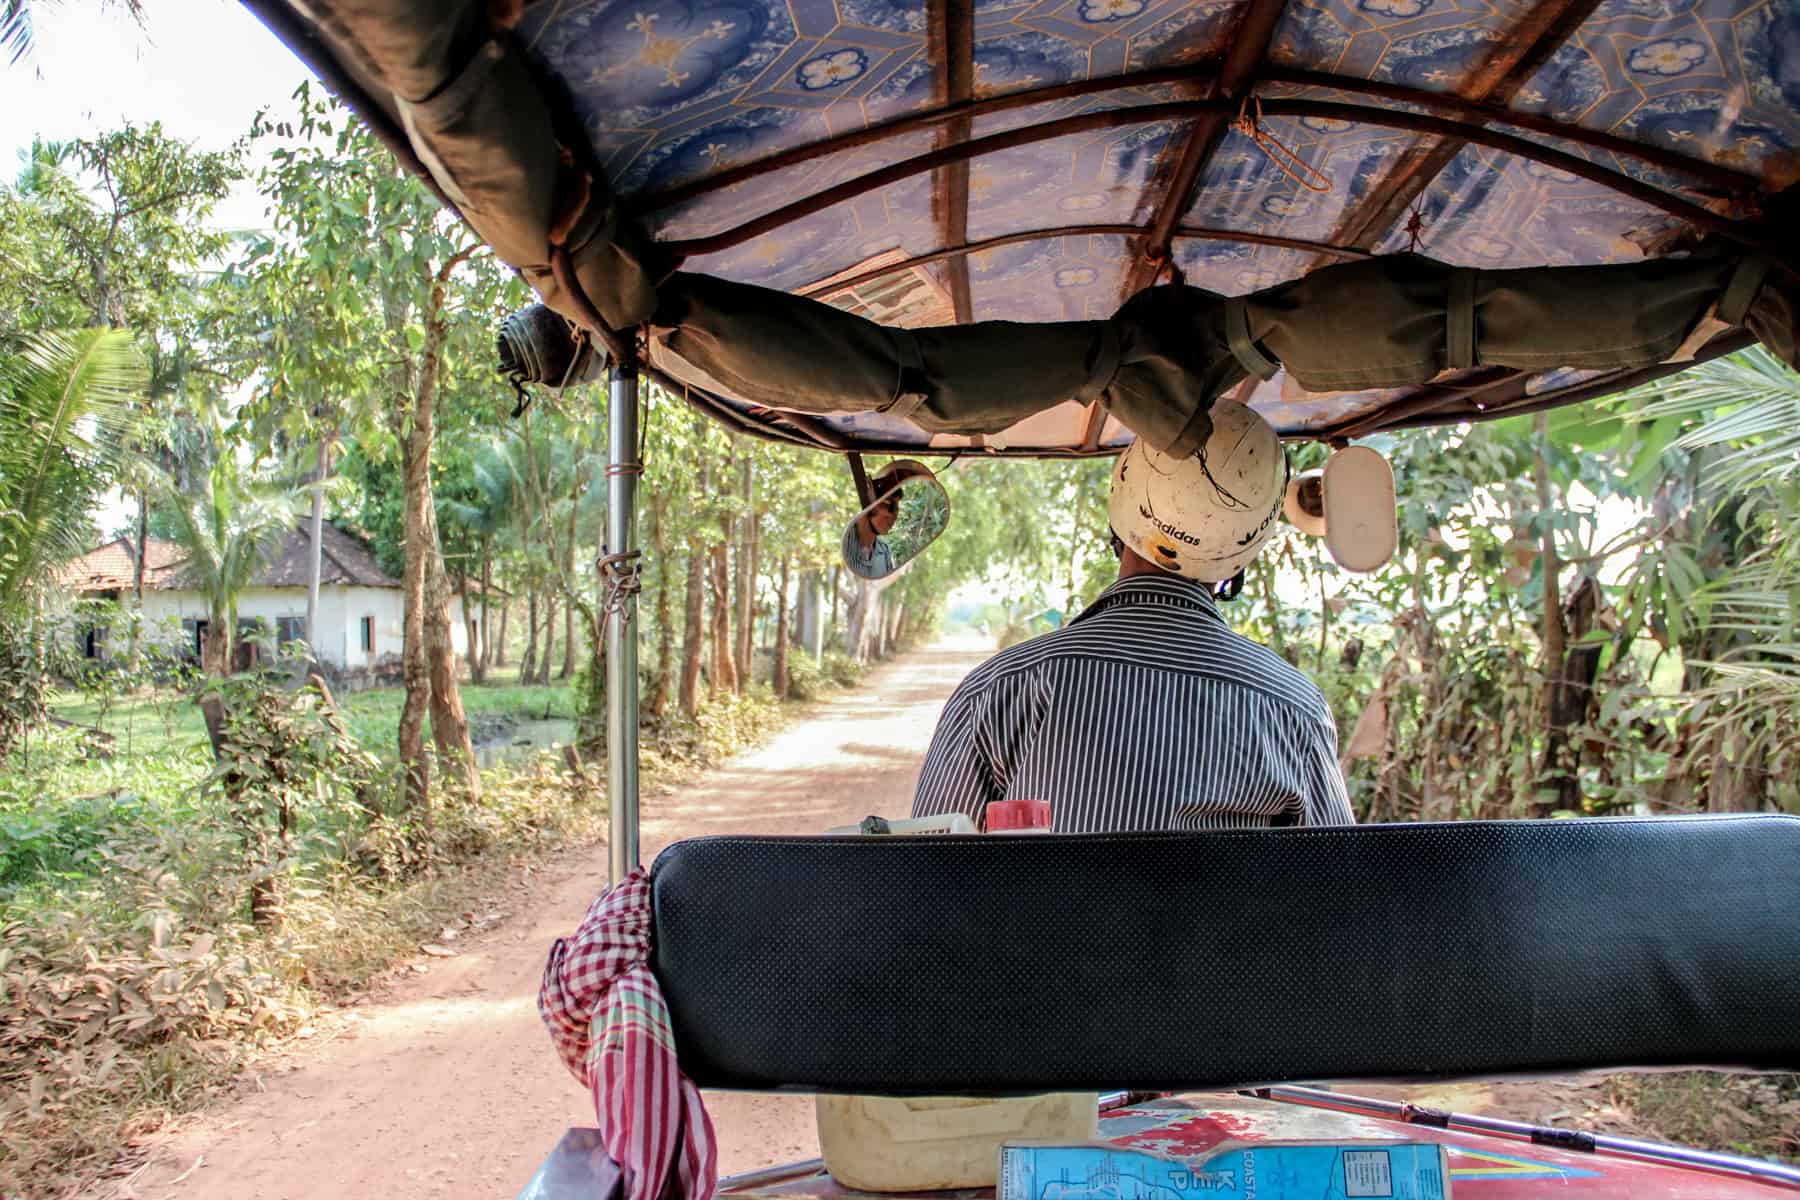 View from the back of a tuk-tuk in Cambodia, riding through a narrow pathway lined with green jungle.